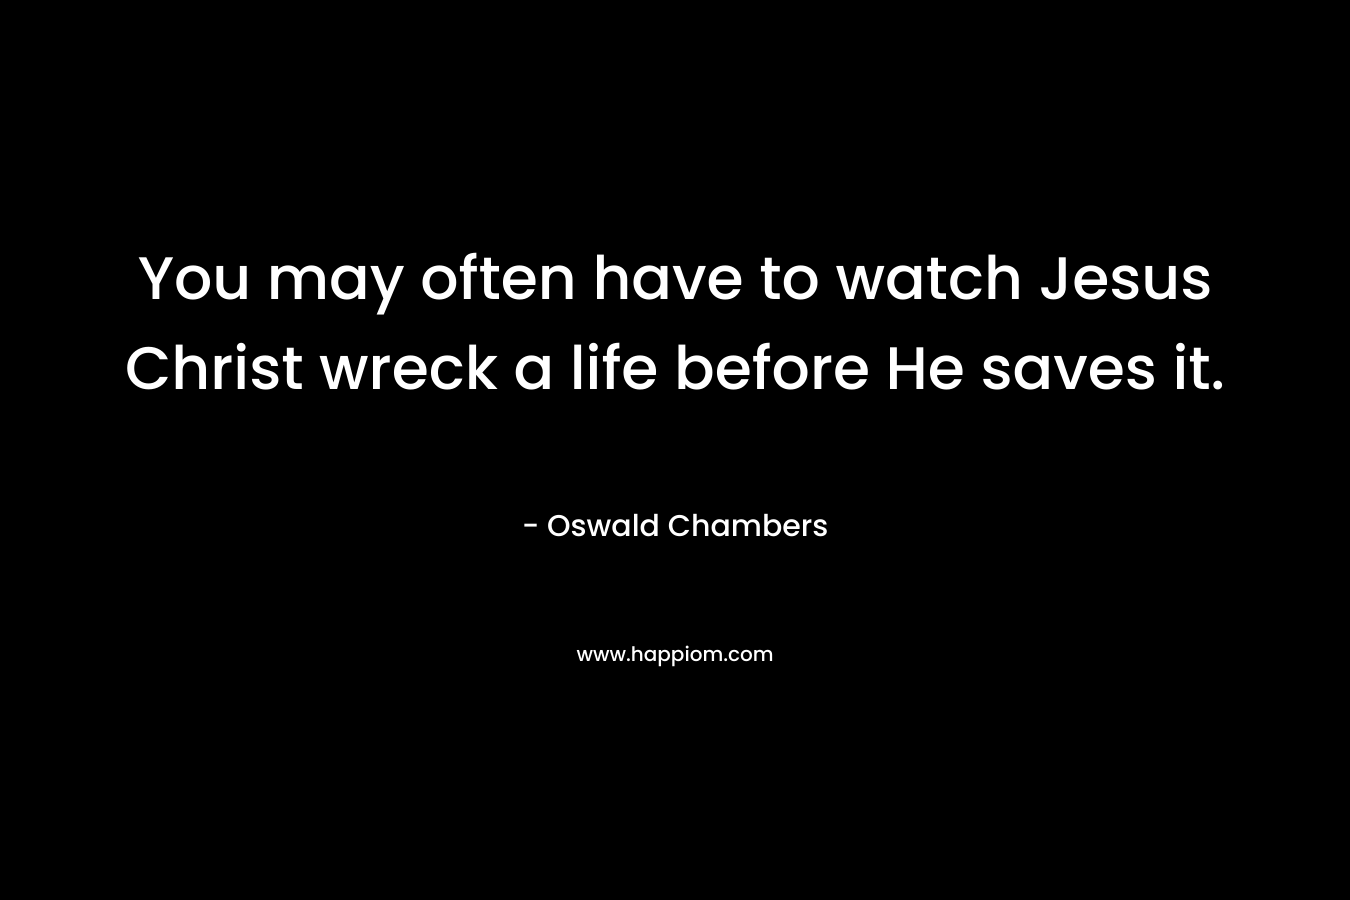 You may often have to watch Jesus Christ wreck a life before He saves it. – Oswald Chambers